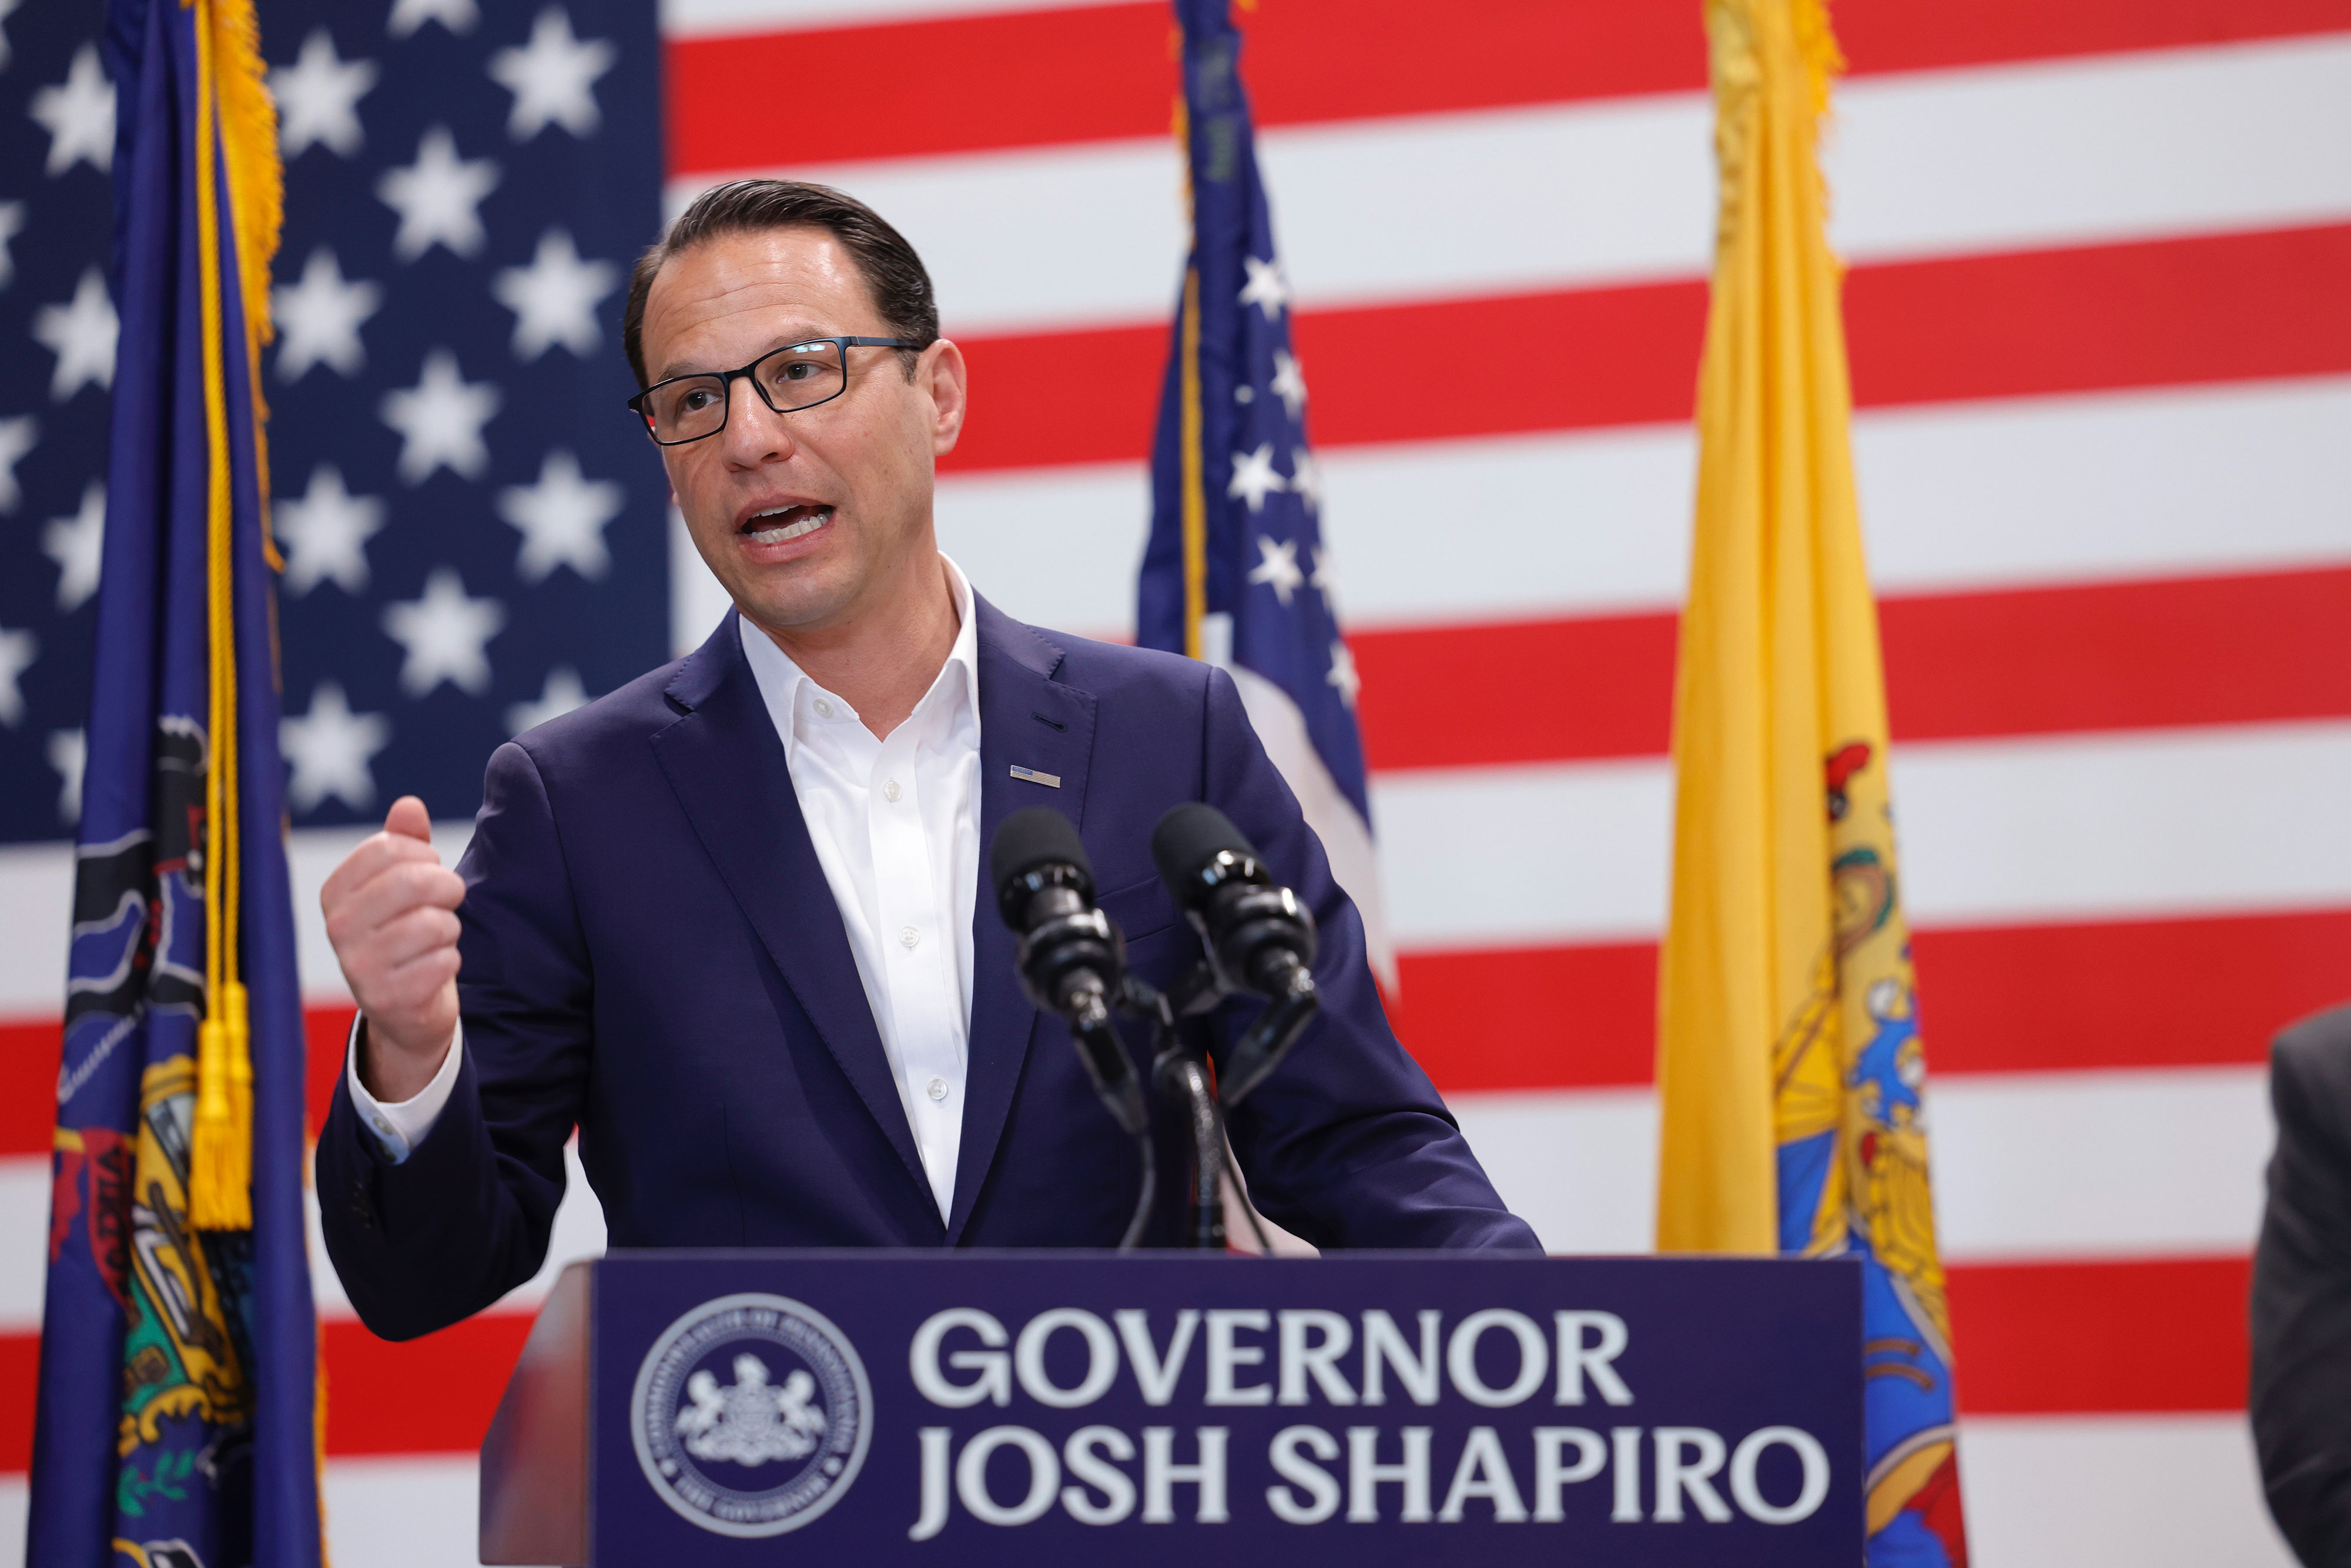 During his inaugural address, Gov. Josh Shapiro spoke about the importance of combating antisemitism.